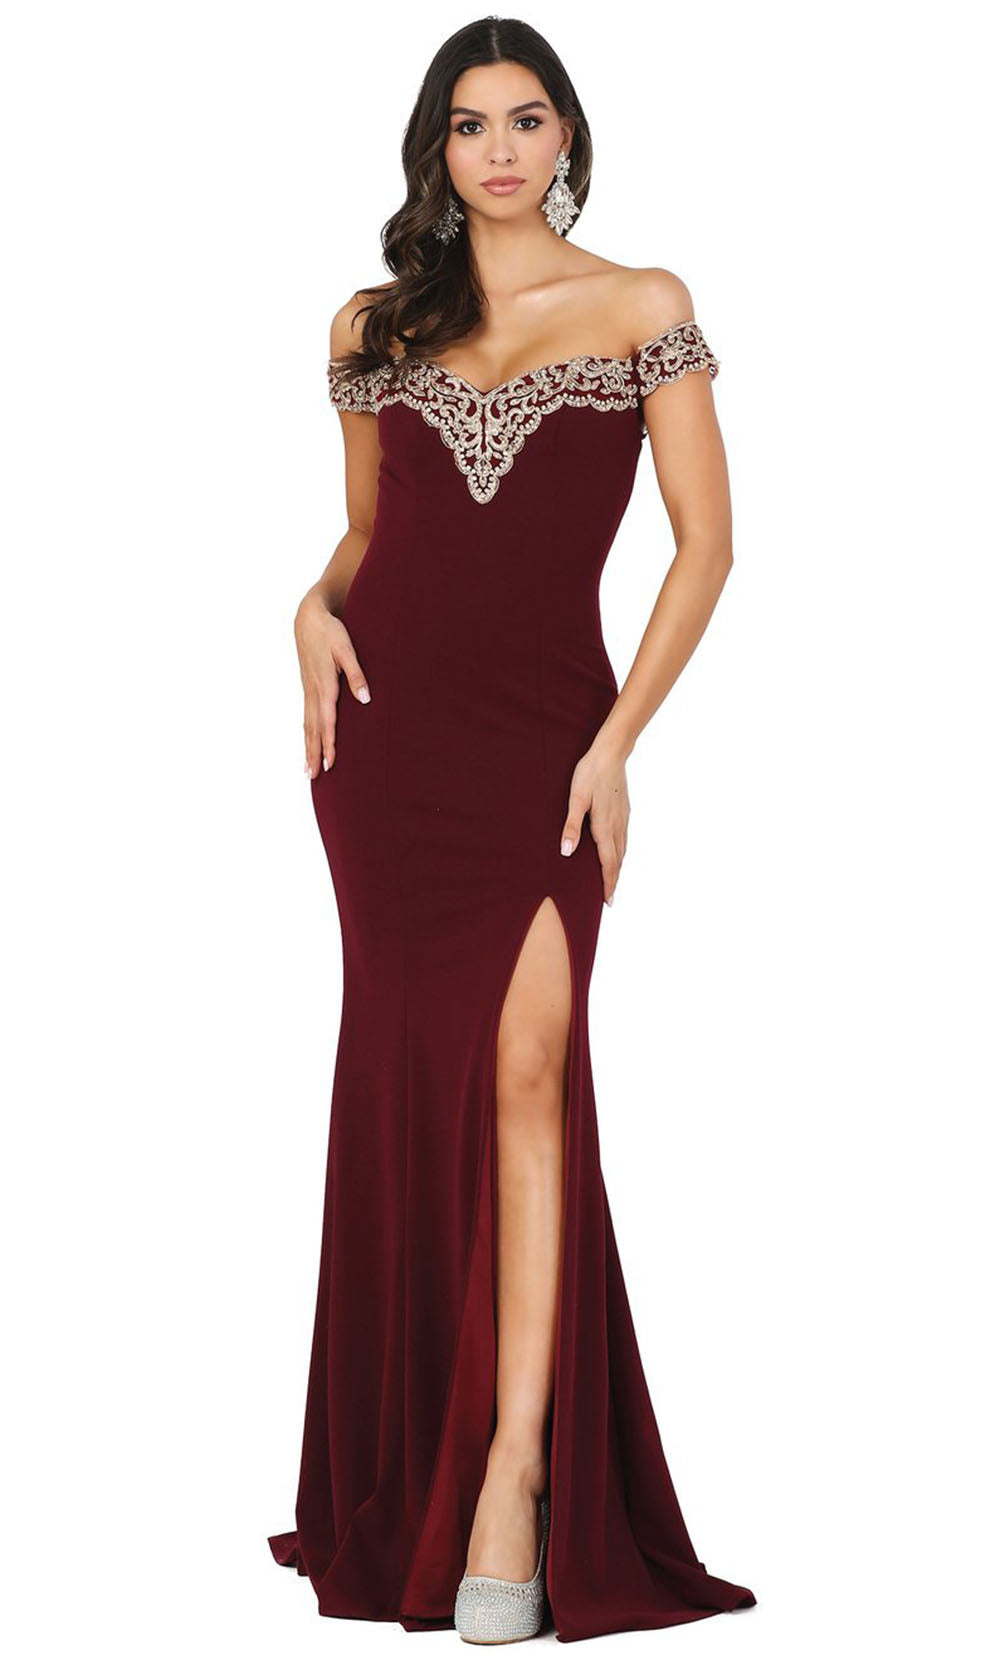 Dancing Queen - 4004 Lace Trim Off Shoulder High Slit Gown In Burgundy